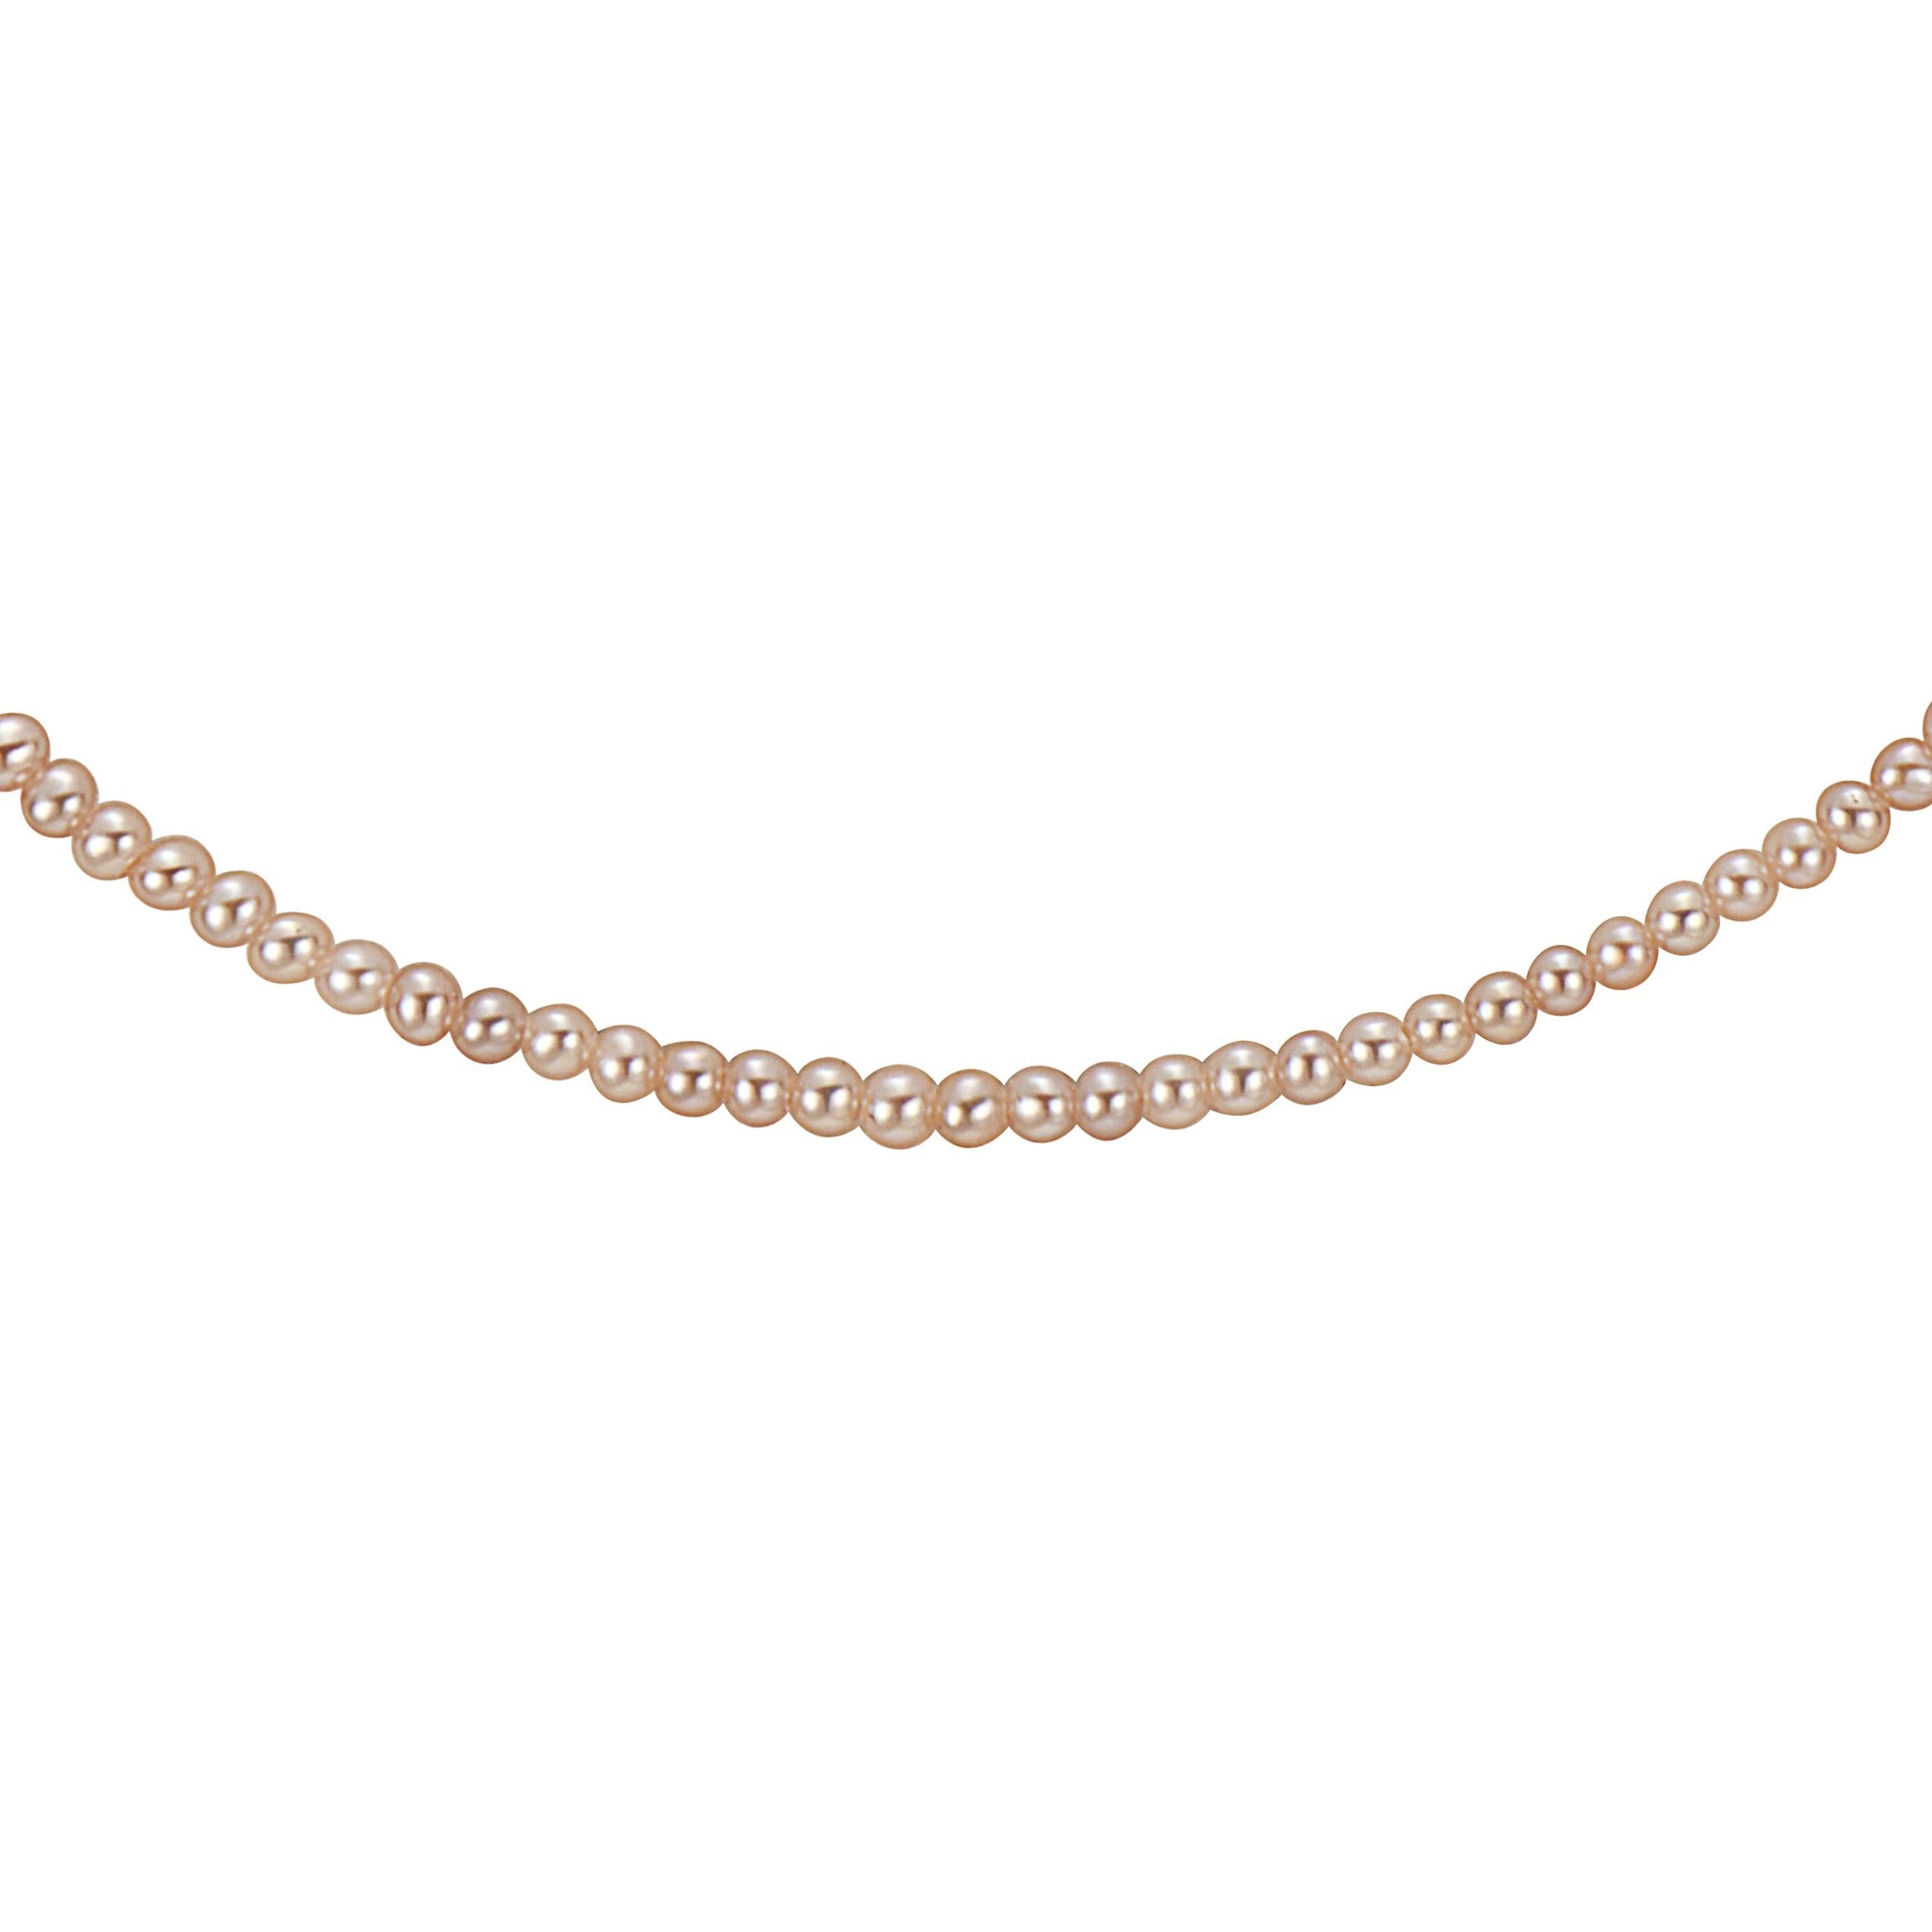 This natural pink color Chinese Freshwater cultured pearl necklace features fine quality, high luster 3-3.5mm pearls. The necklace is strung to 18 inch length with a 14K yellow gold lobster claw clasp. 
Featuring high quality, lustrous, pink Chinese